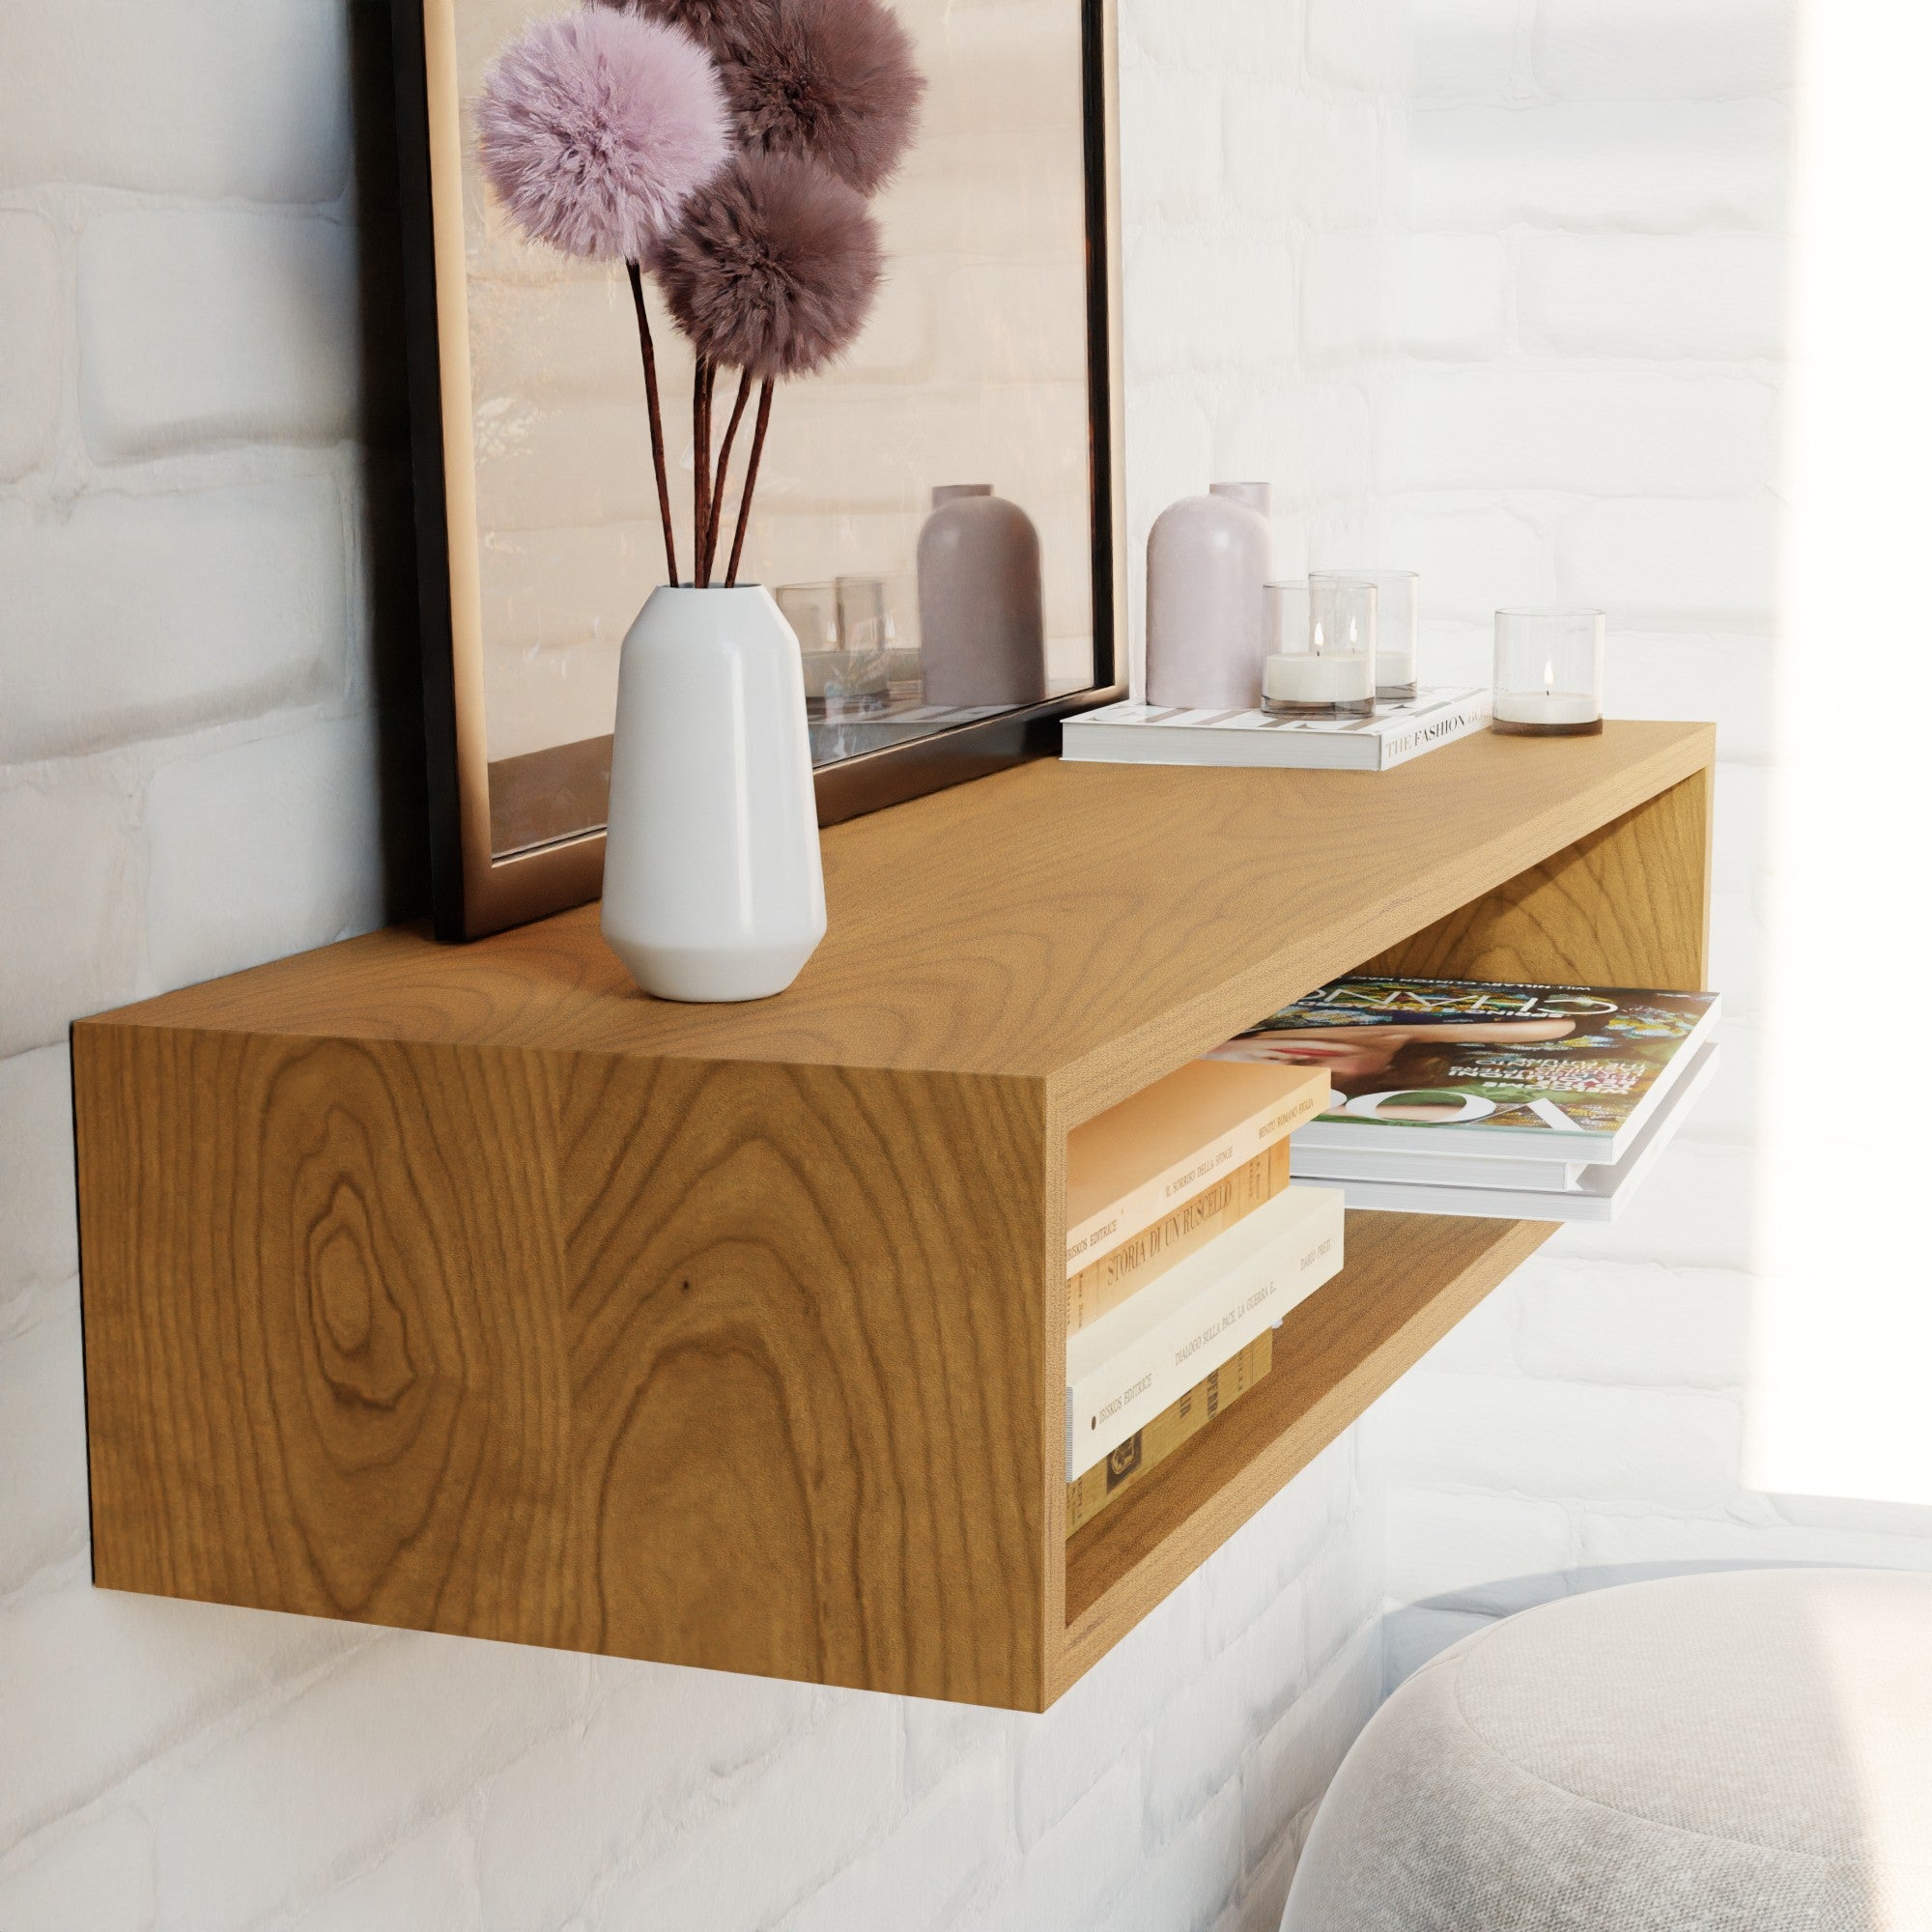 Floating Console Table in Solid Cherry - Krøvel Furniture Co. Handmade in Maine